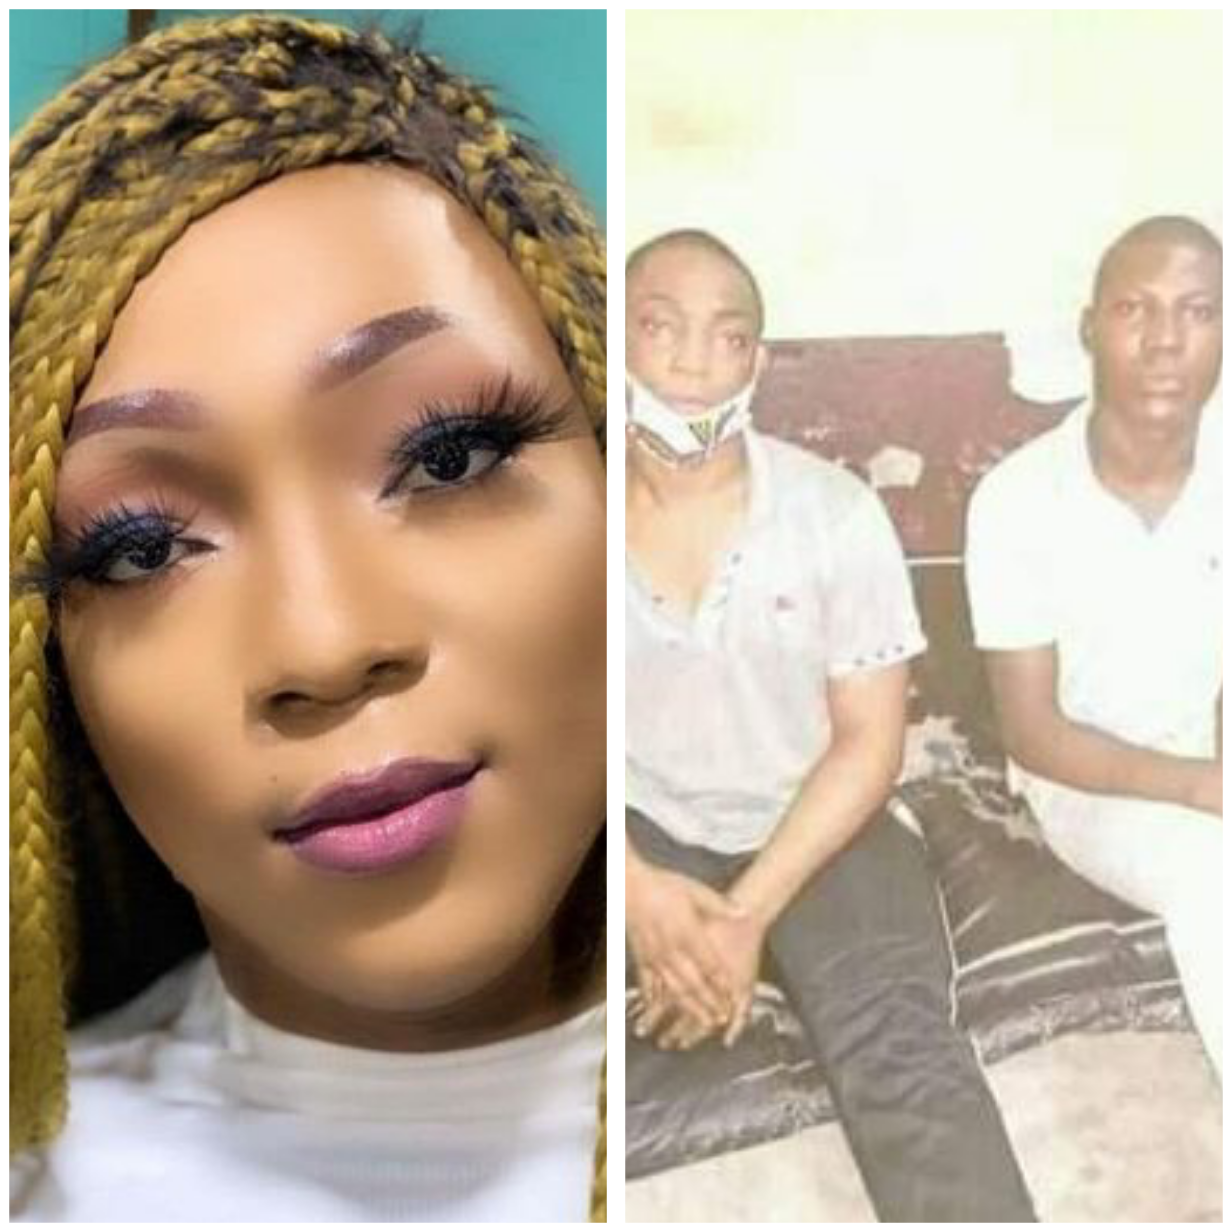 Popular Cameroonian crossdresser, Shakiro, one other sentenced to 5 years in prison for 